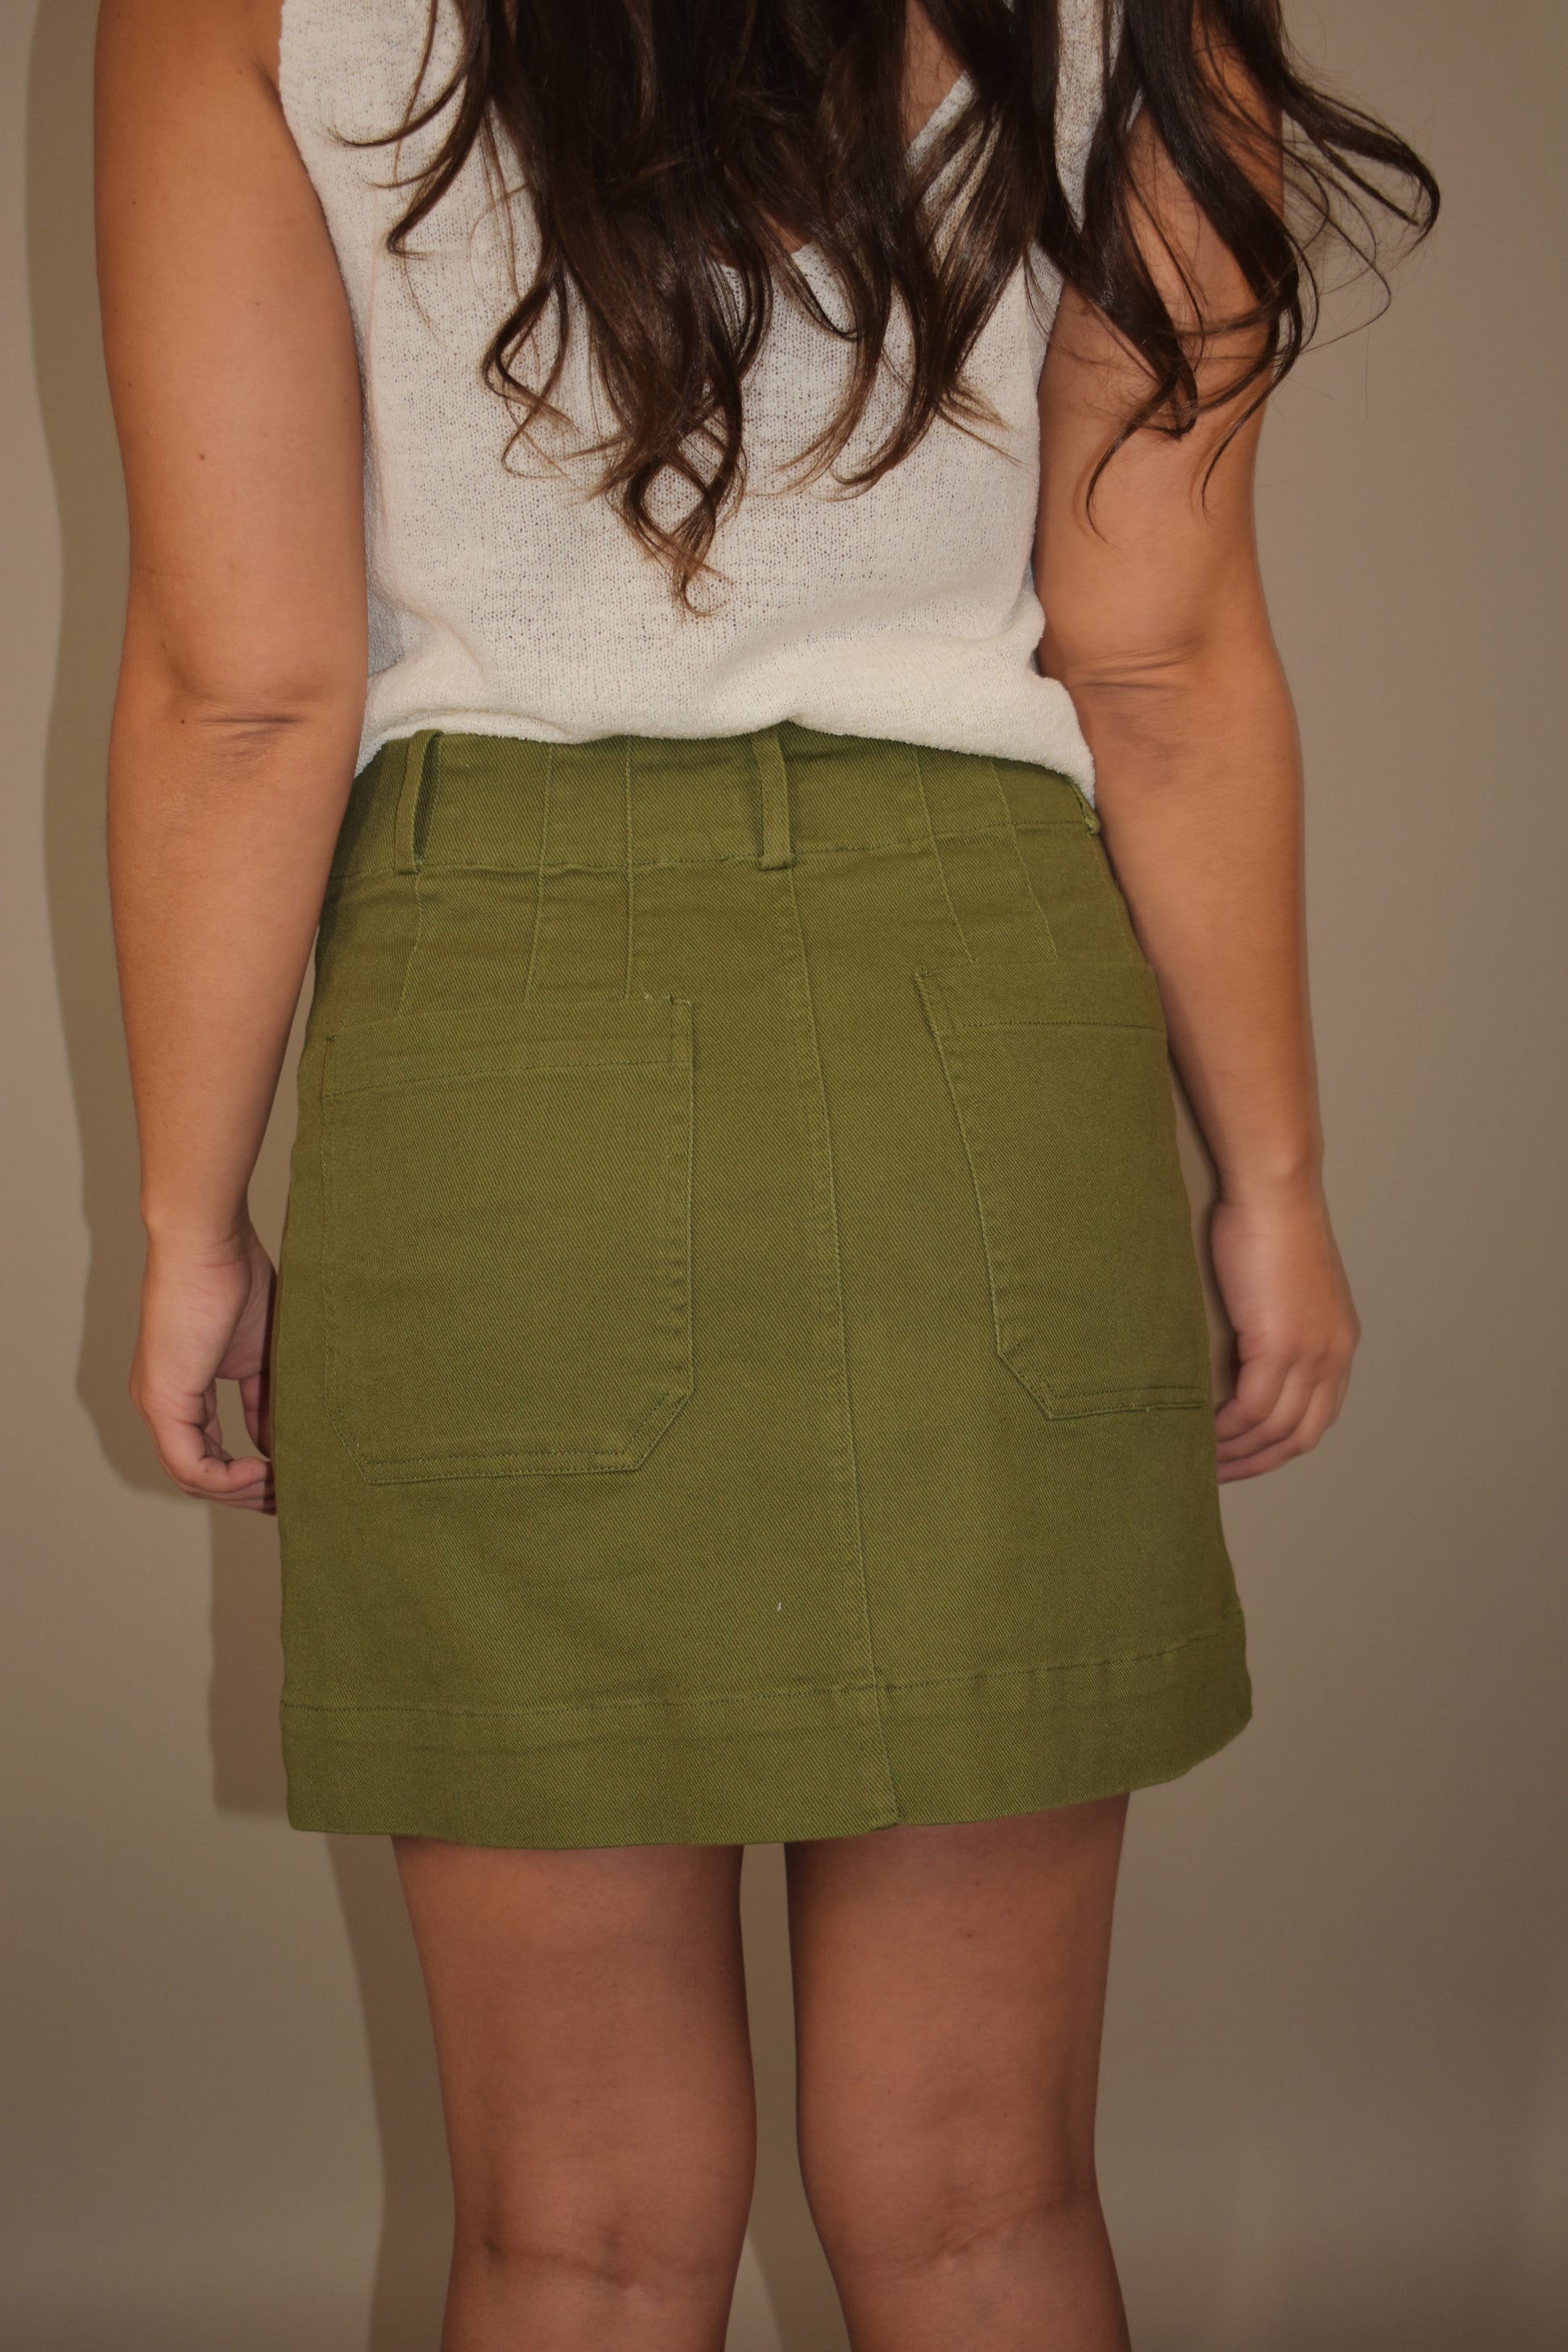 olive mini denim cargo skirt with front patch pockets. zip and button front enclosure. belt loops. has back pockets.